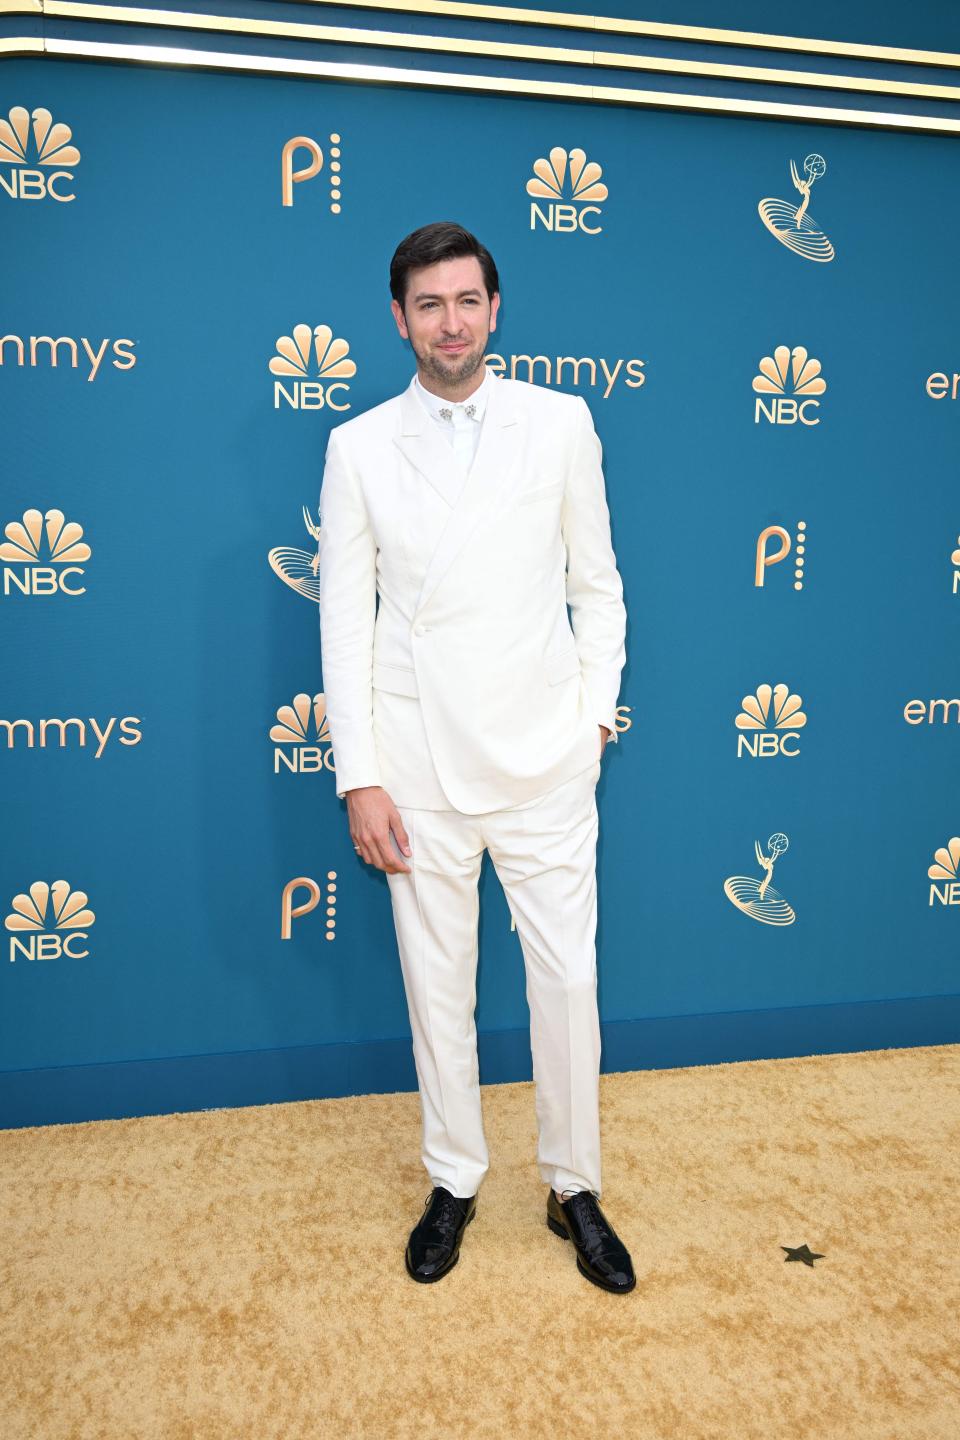 The Best Dressed Men of the Emmys Are Going Big for the Small Screen